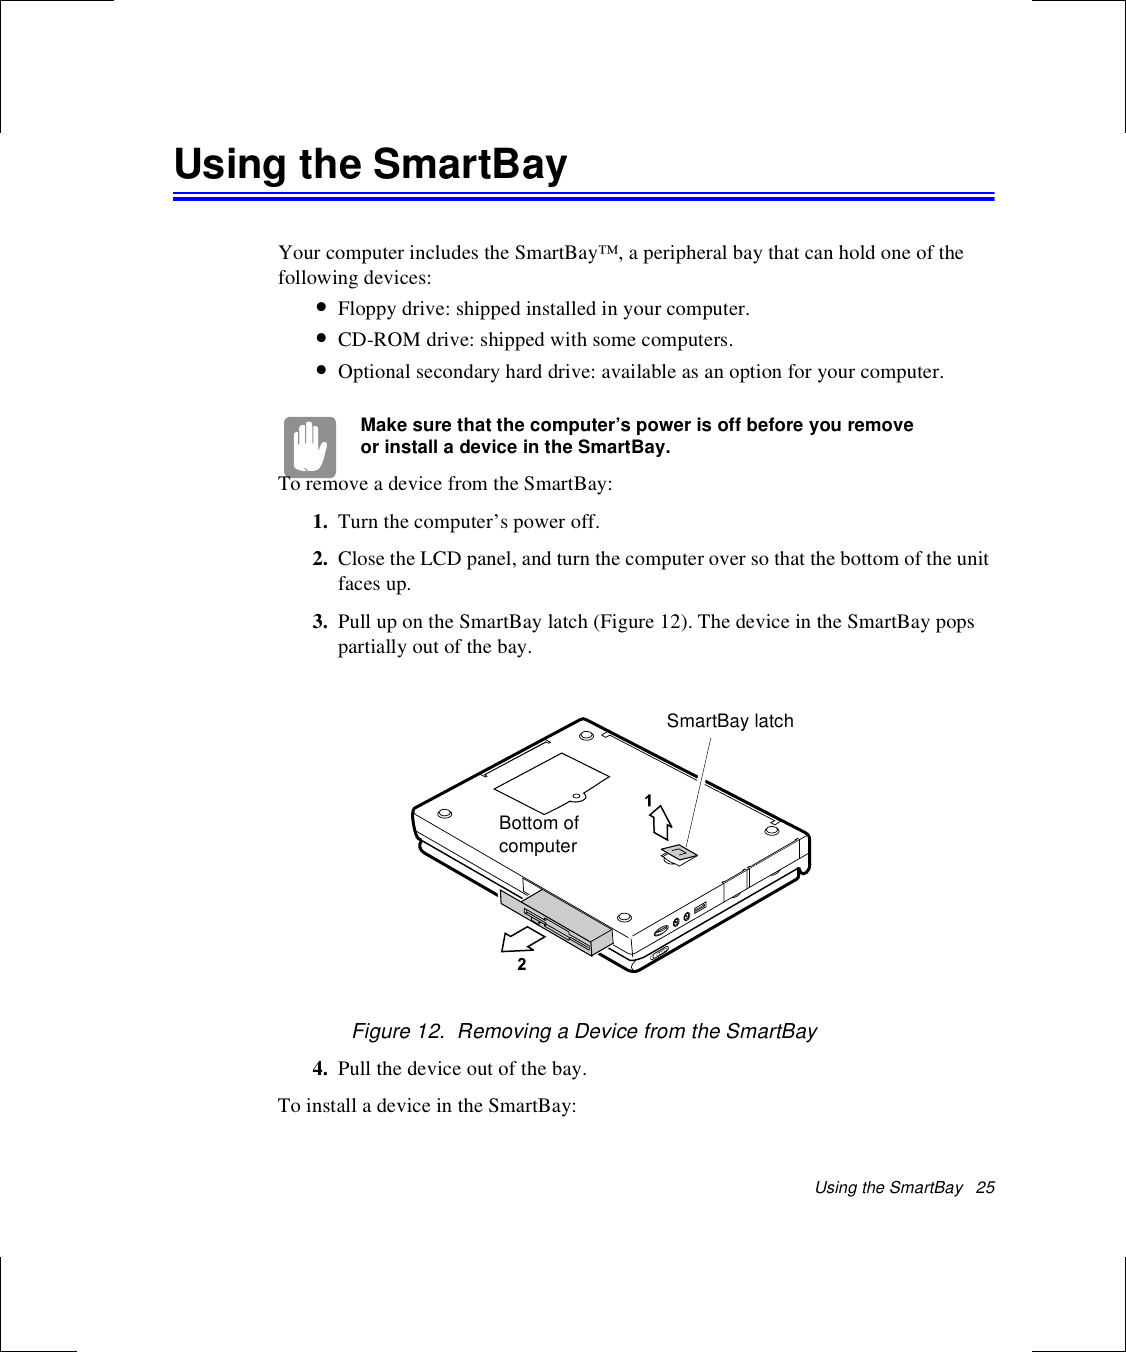 Using the SmartBay   25Using the SmartBayYour computer includes the SmartBay™, a peripheral bay that can hold one of the following devices:•Floppy drive: shipped installed in your computer.•CD-ROM drive: shipped with some computers.•Optional secondary hard drive: available as an option for your computer.Make sure that the computer’s power is off before you remove or install a device in the SmartBay.To remove a device from the SmartBay:1. Turn the computer’s power off. 2. Close the LCD panel, and turn the computer over so that the bottom of the unit faces up.3. Pull up on the SmartBay latch (Figure 12). The device in the SmartBay pops partially out of the bay.Figure 12.  Removing a Device from the SmartBay4. Pull the device out of the bay.To install a device in the SmartBay:Bottom of computerSmartBay latch